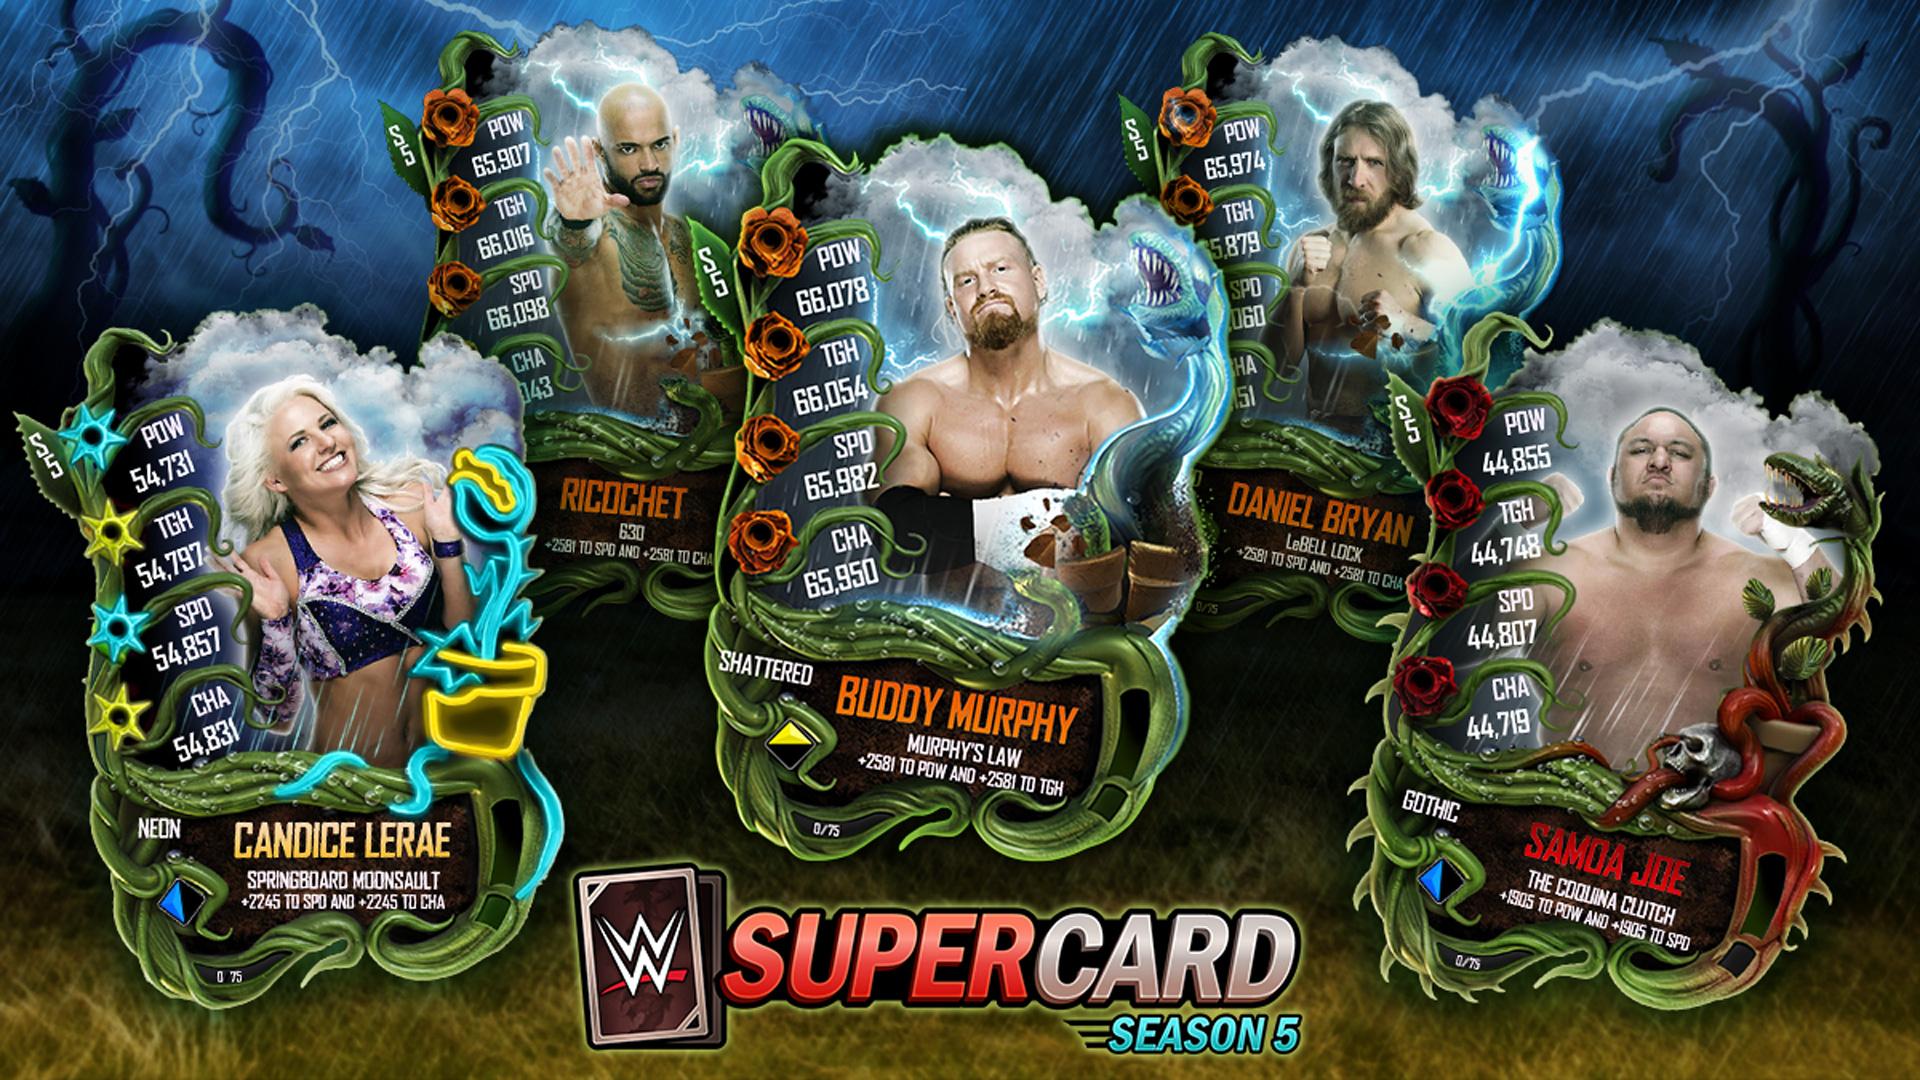 WWE SuperCard Spring 2019 Promotion, featuring 18 New Cards!. WWE SuperCard News